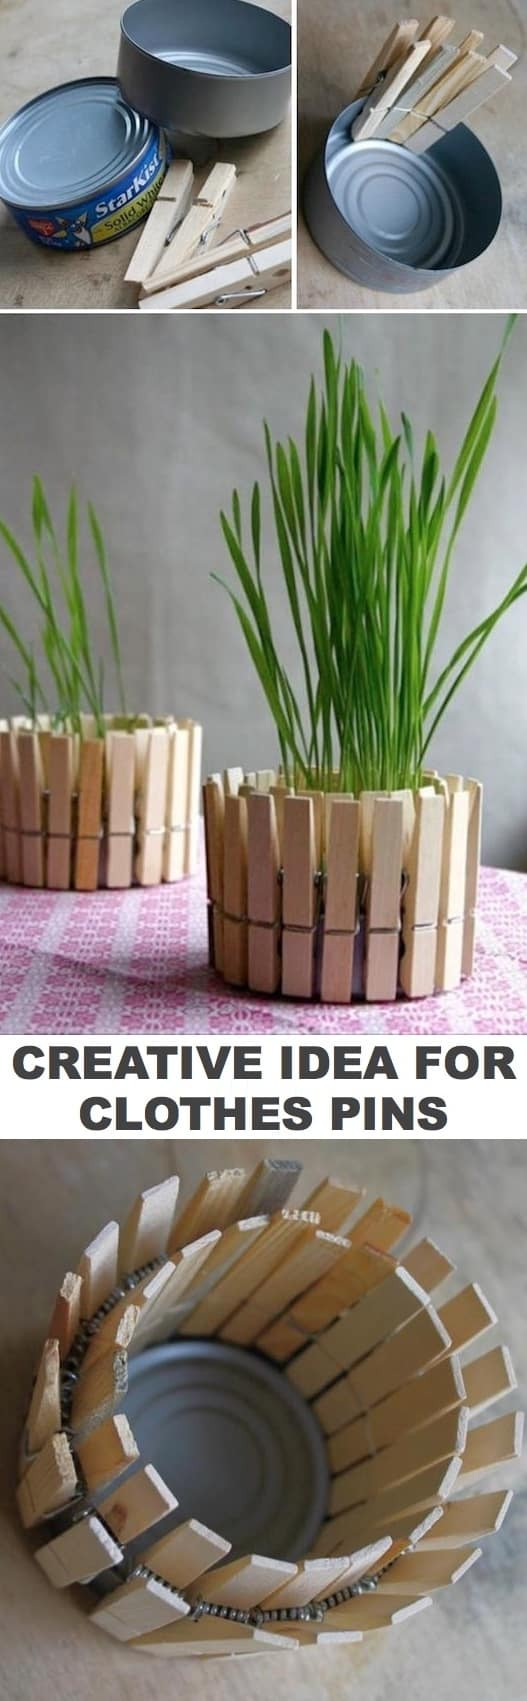 Simple Crafts Ideas For Adults
 Easy DIY Craft Ideas That Will Spark Your Creativity for